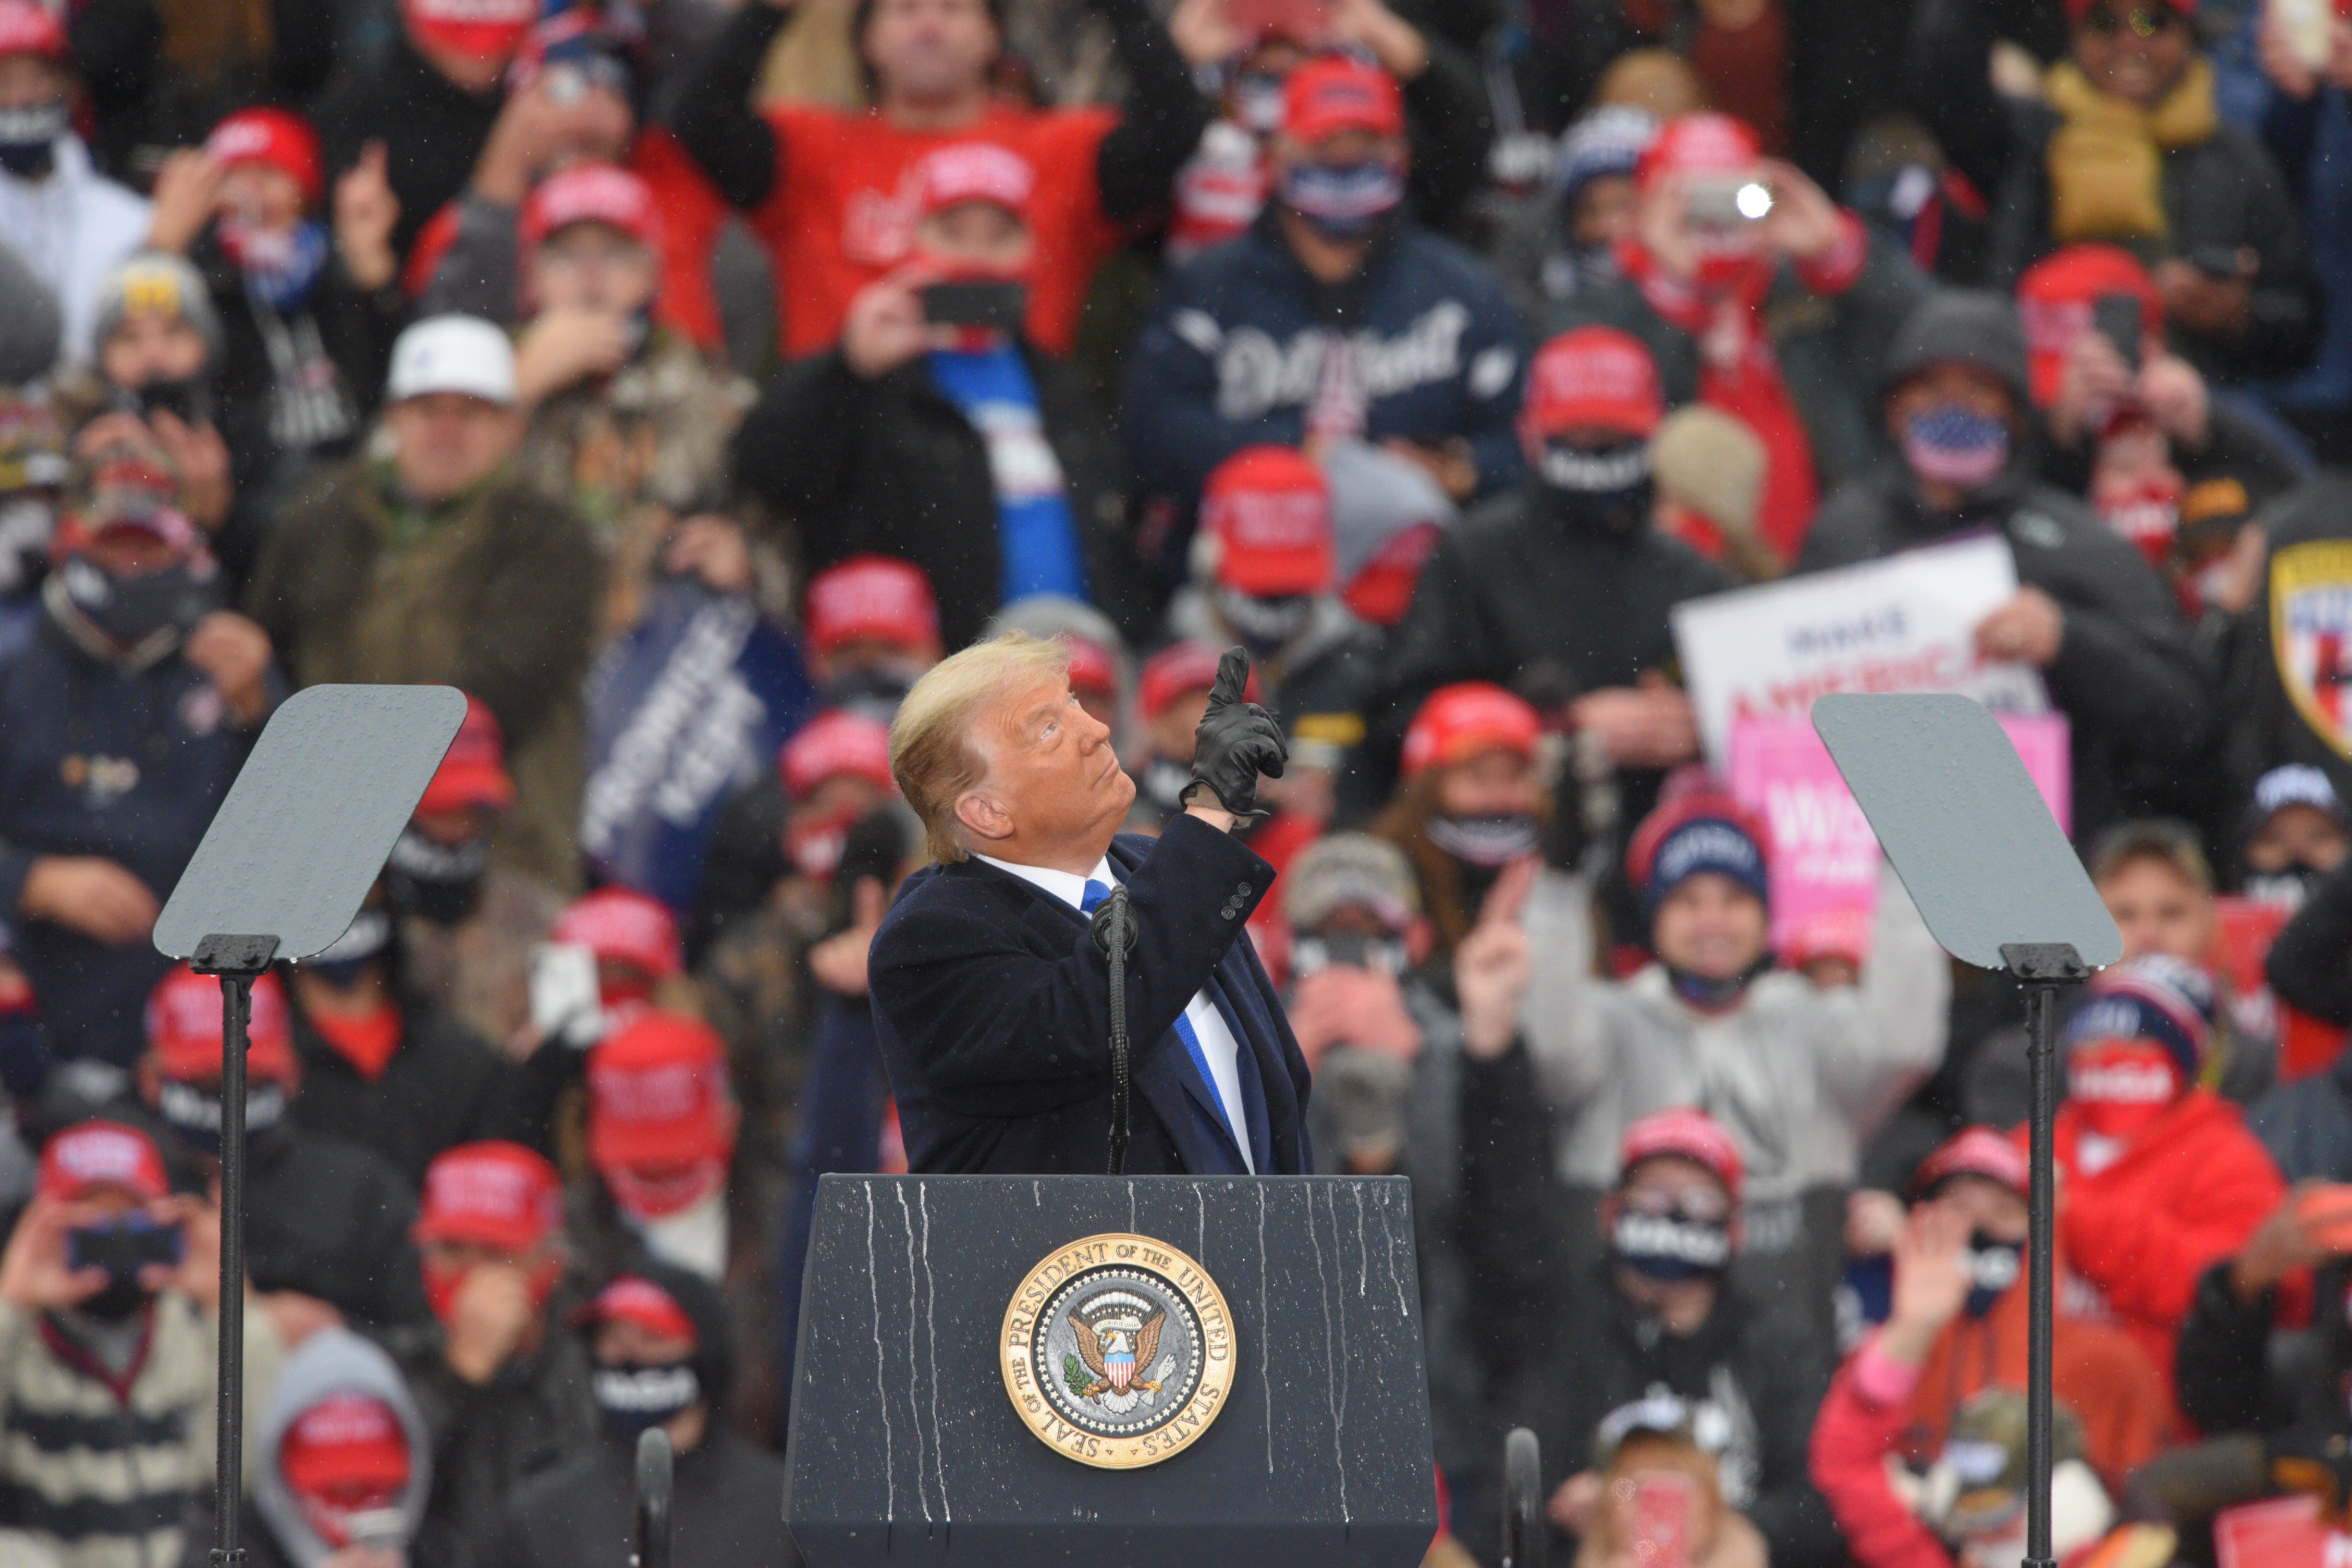 President Trump points towards the sky as the song says "God Bless The USA" during his Make America Great Again Victory Rally at AV Flight at the Capital Region International Airport in Lansing, Tuesday, October 27, 2020.